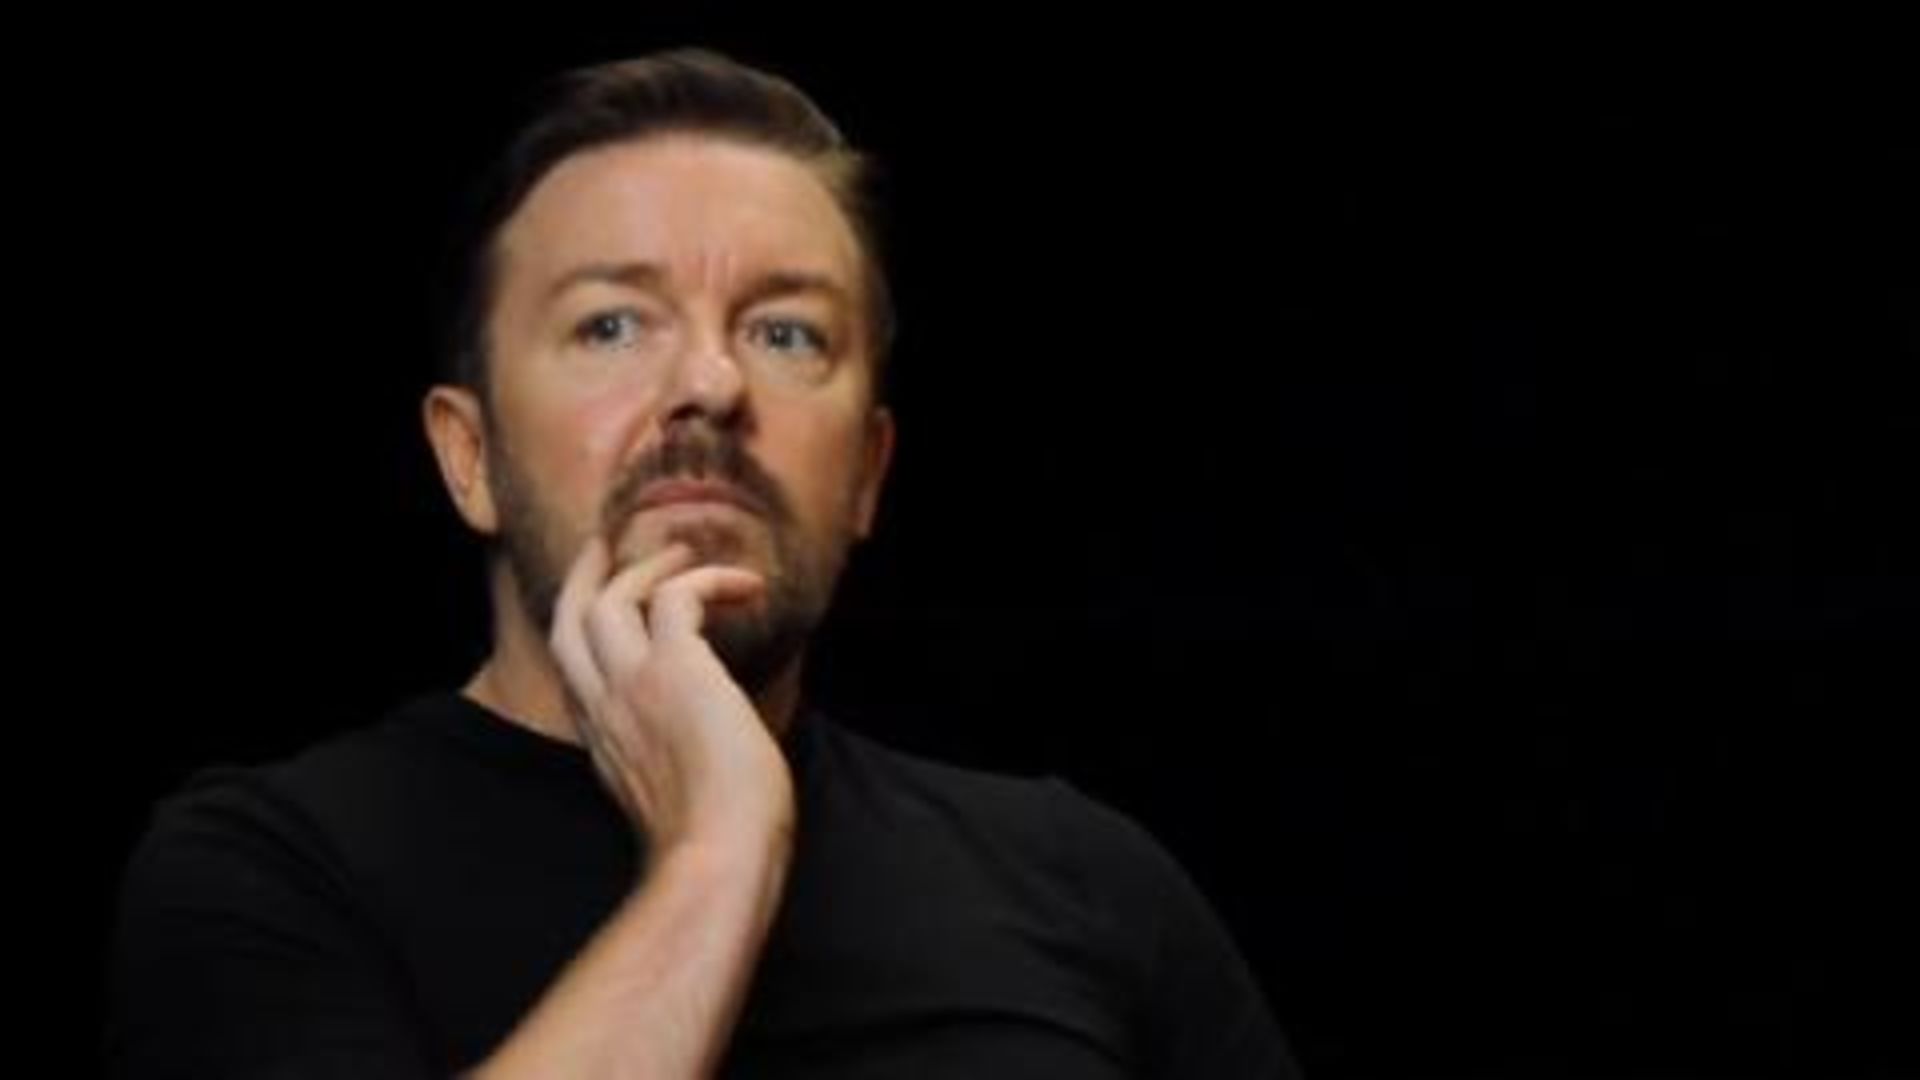 Ricky Gervais Comments On Will Smith